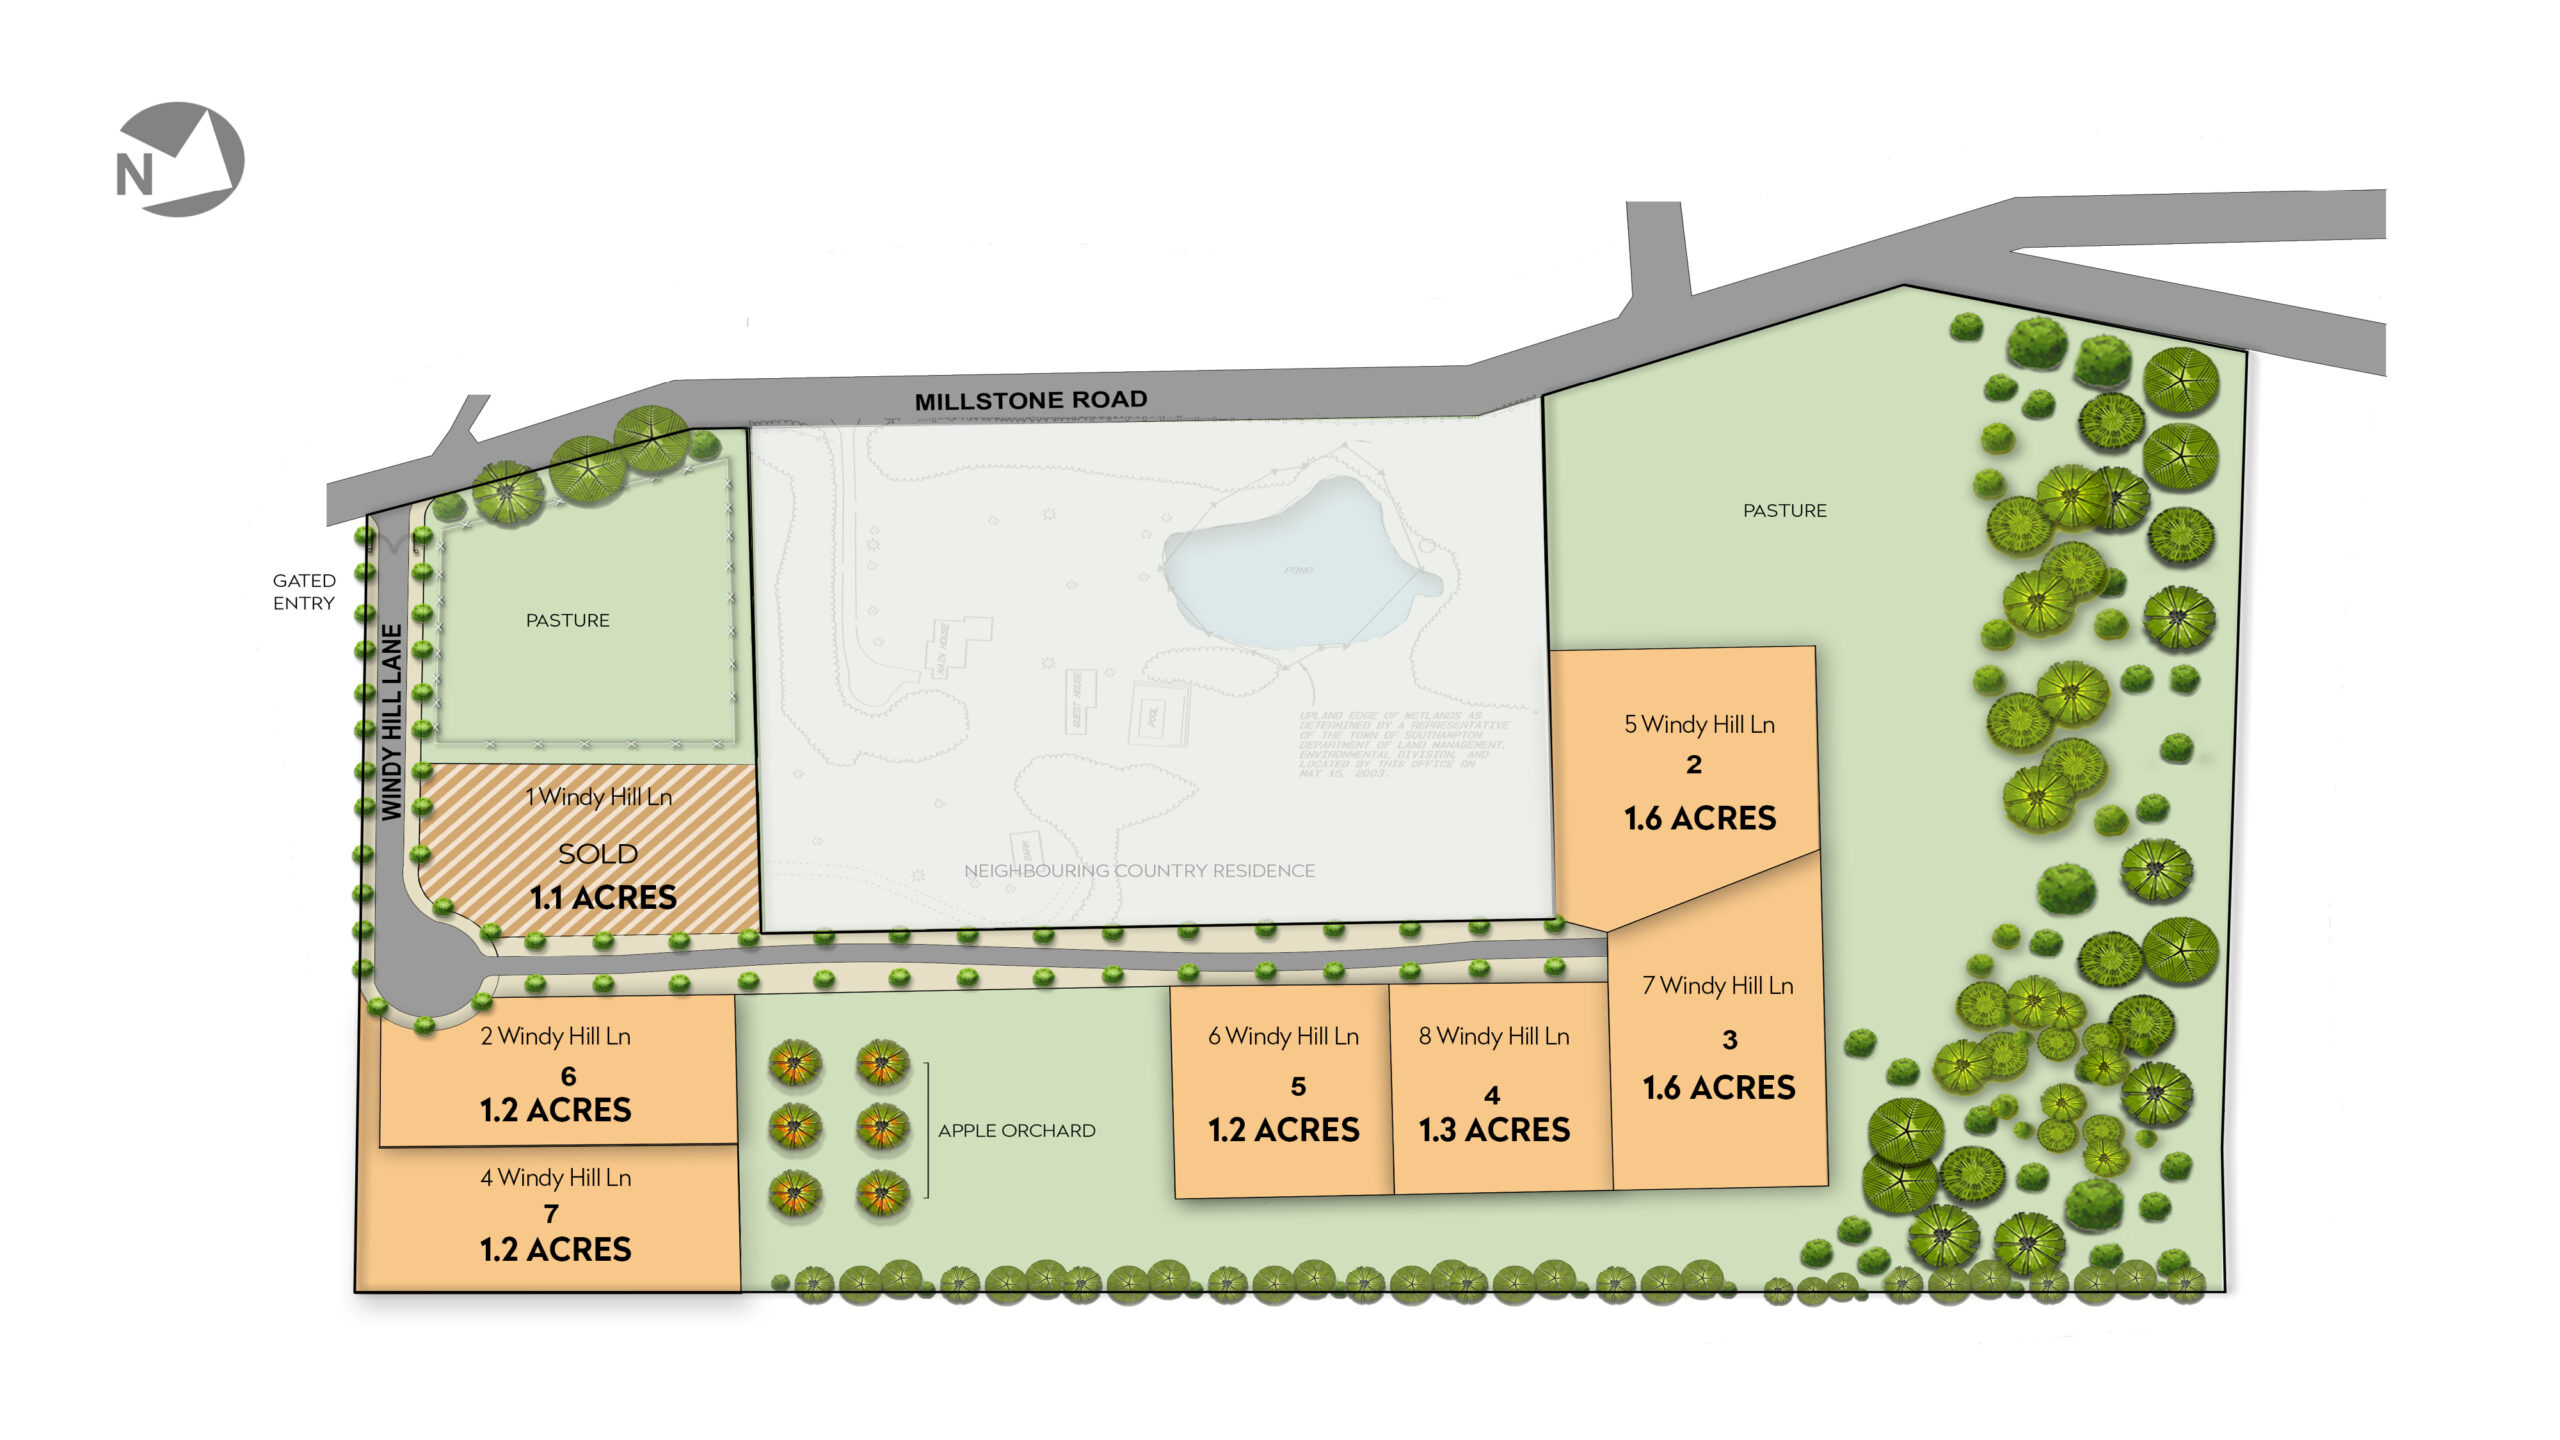 The Windy Hill site plan.